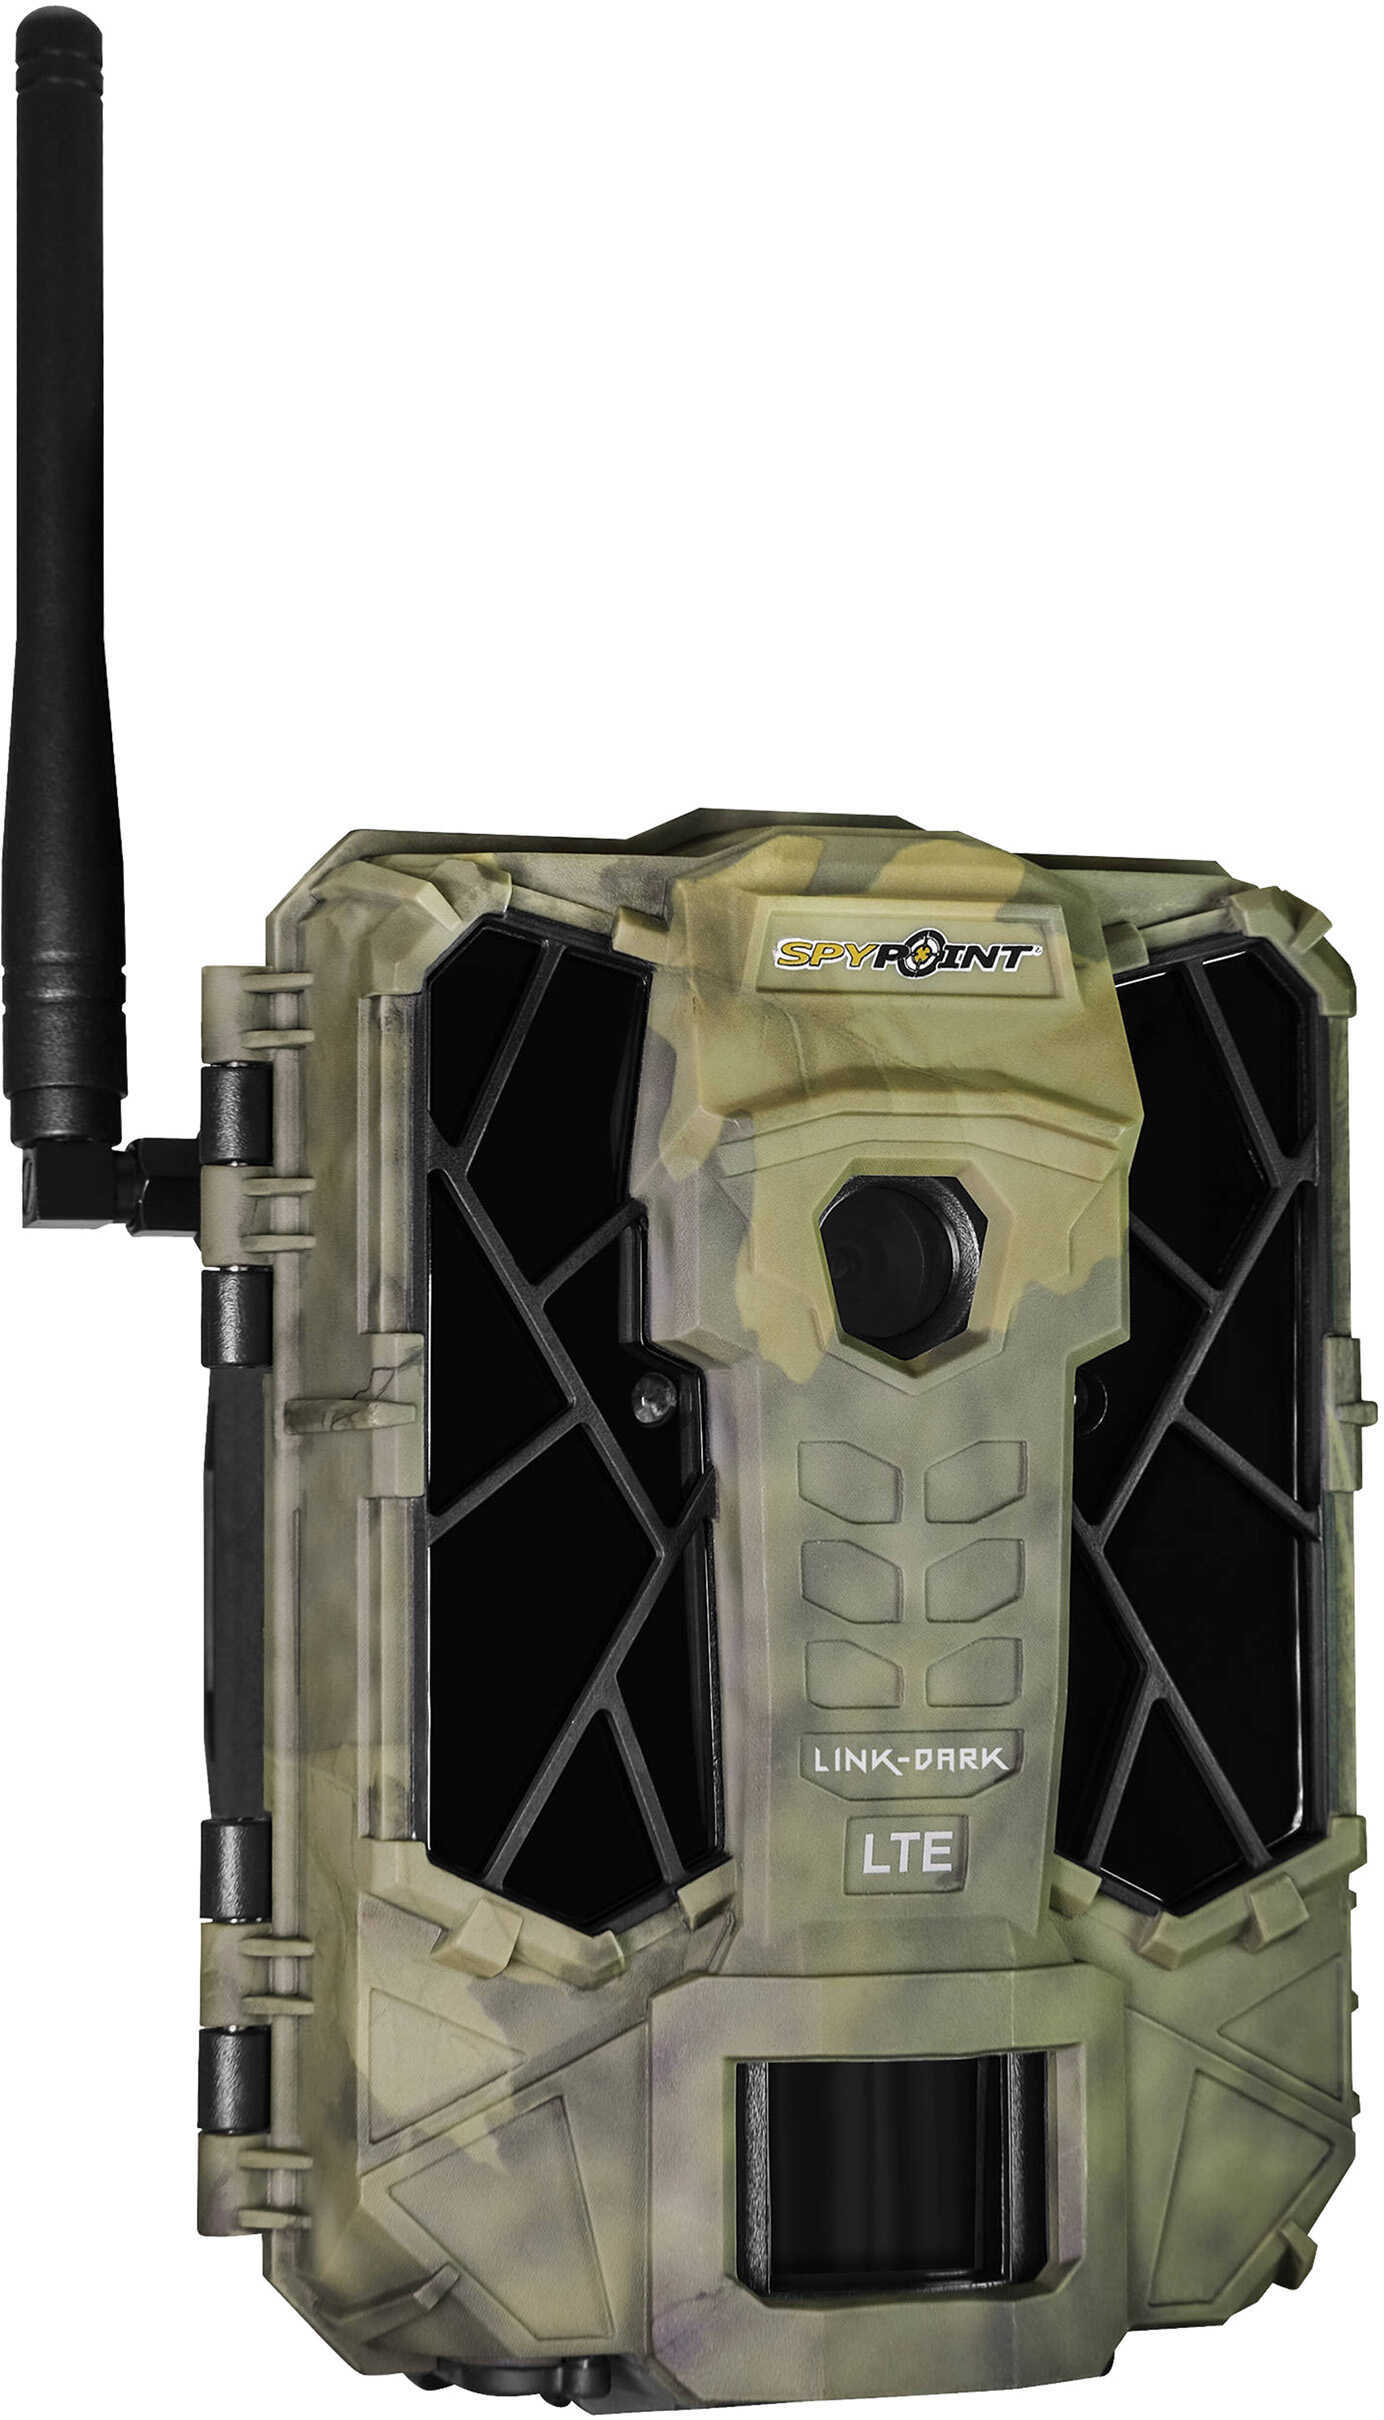 Spy Point Cellular Series Camouflage